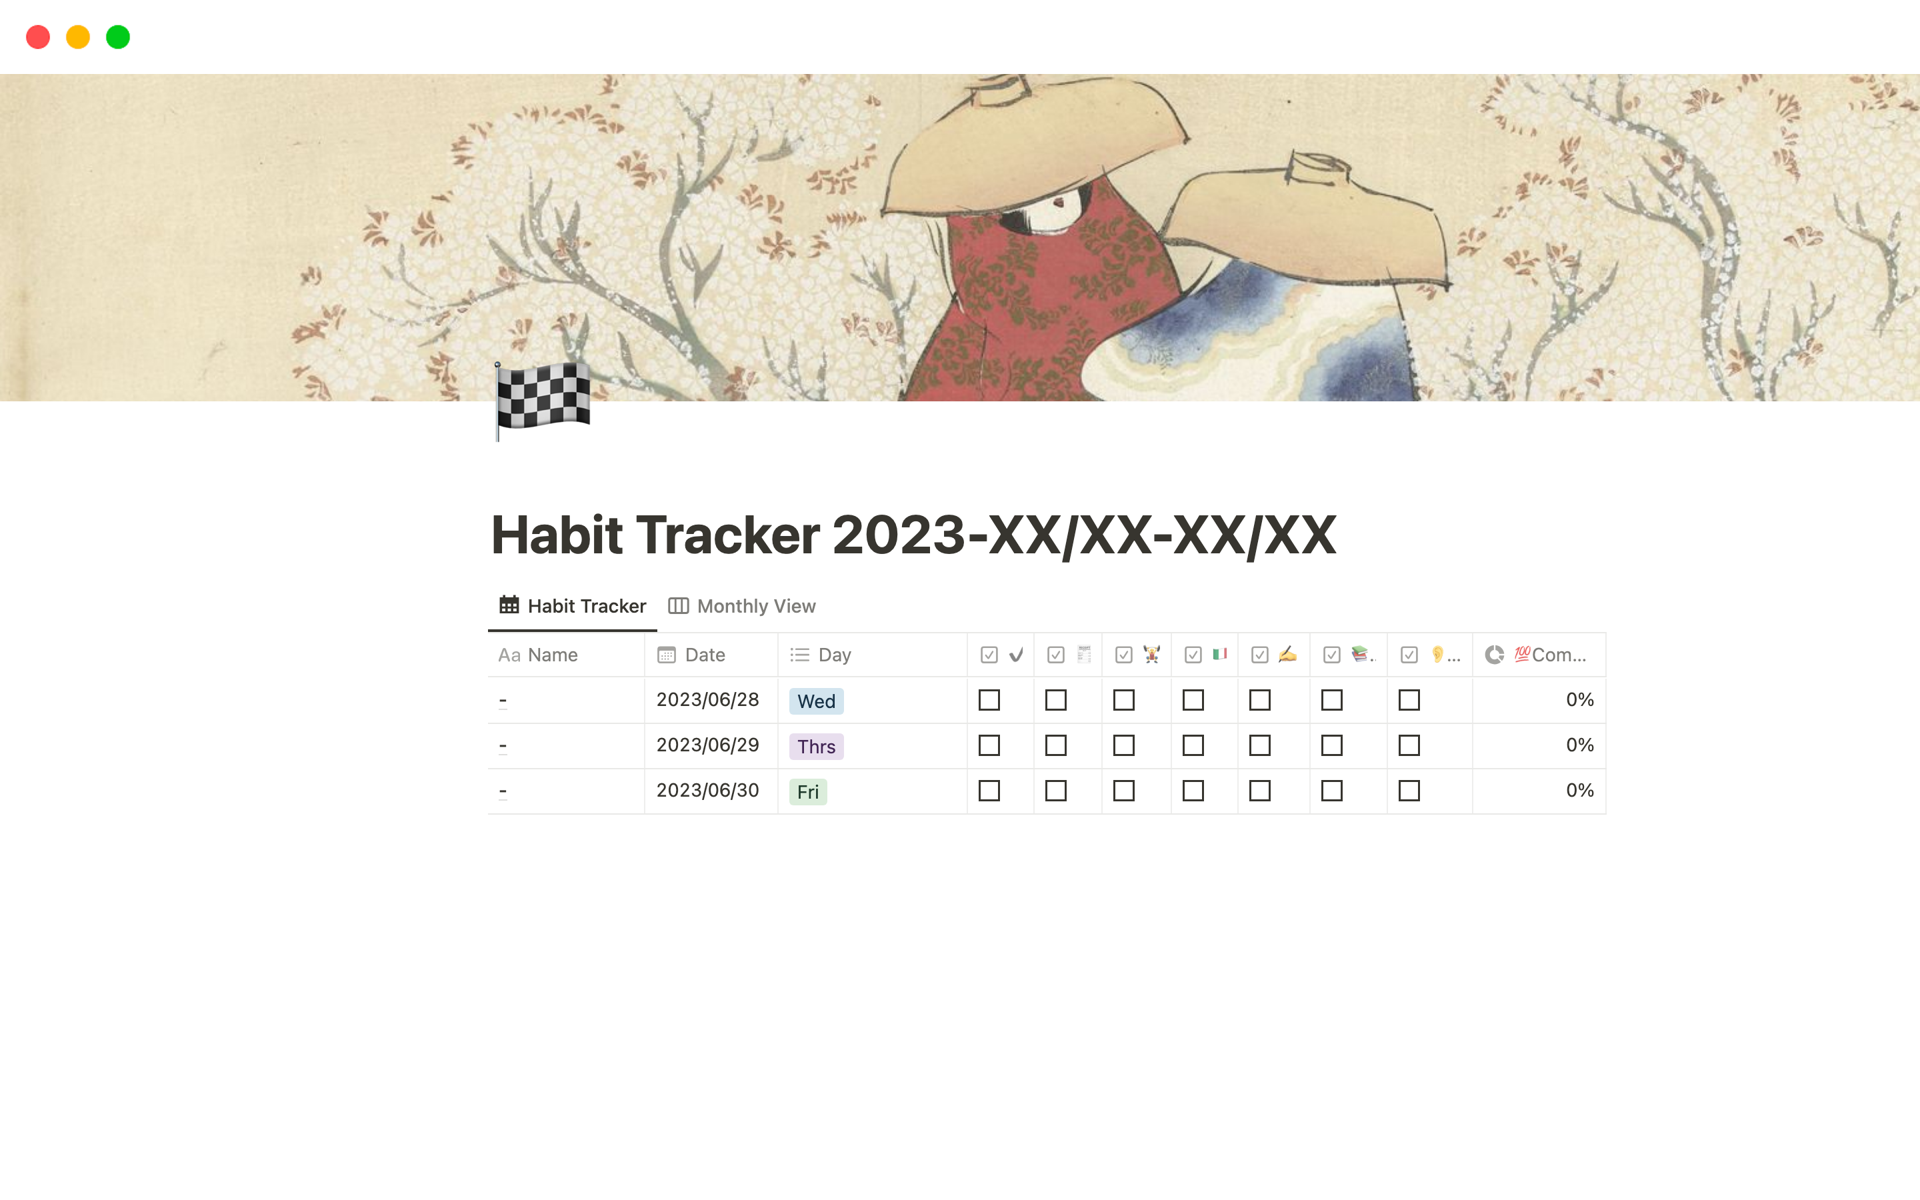 You can track your habit easily and visually with this template!!!